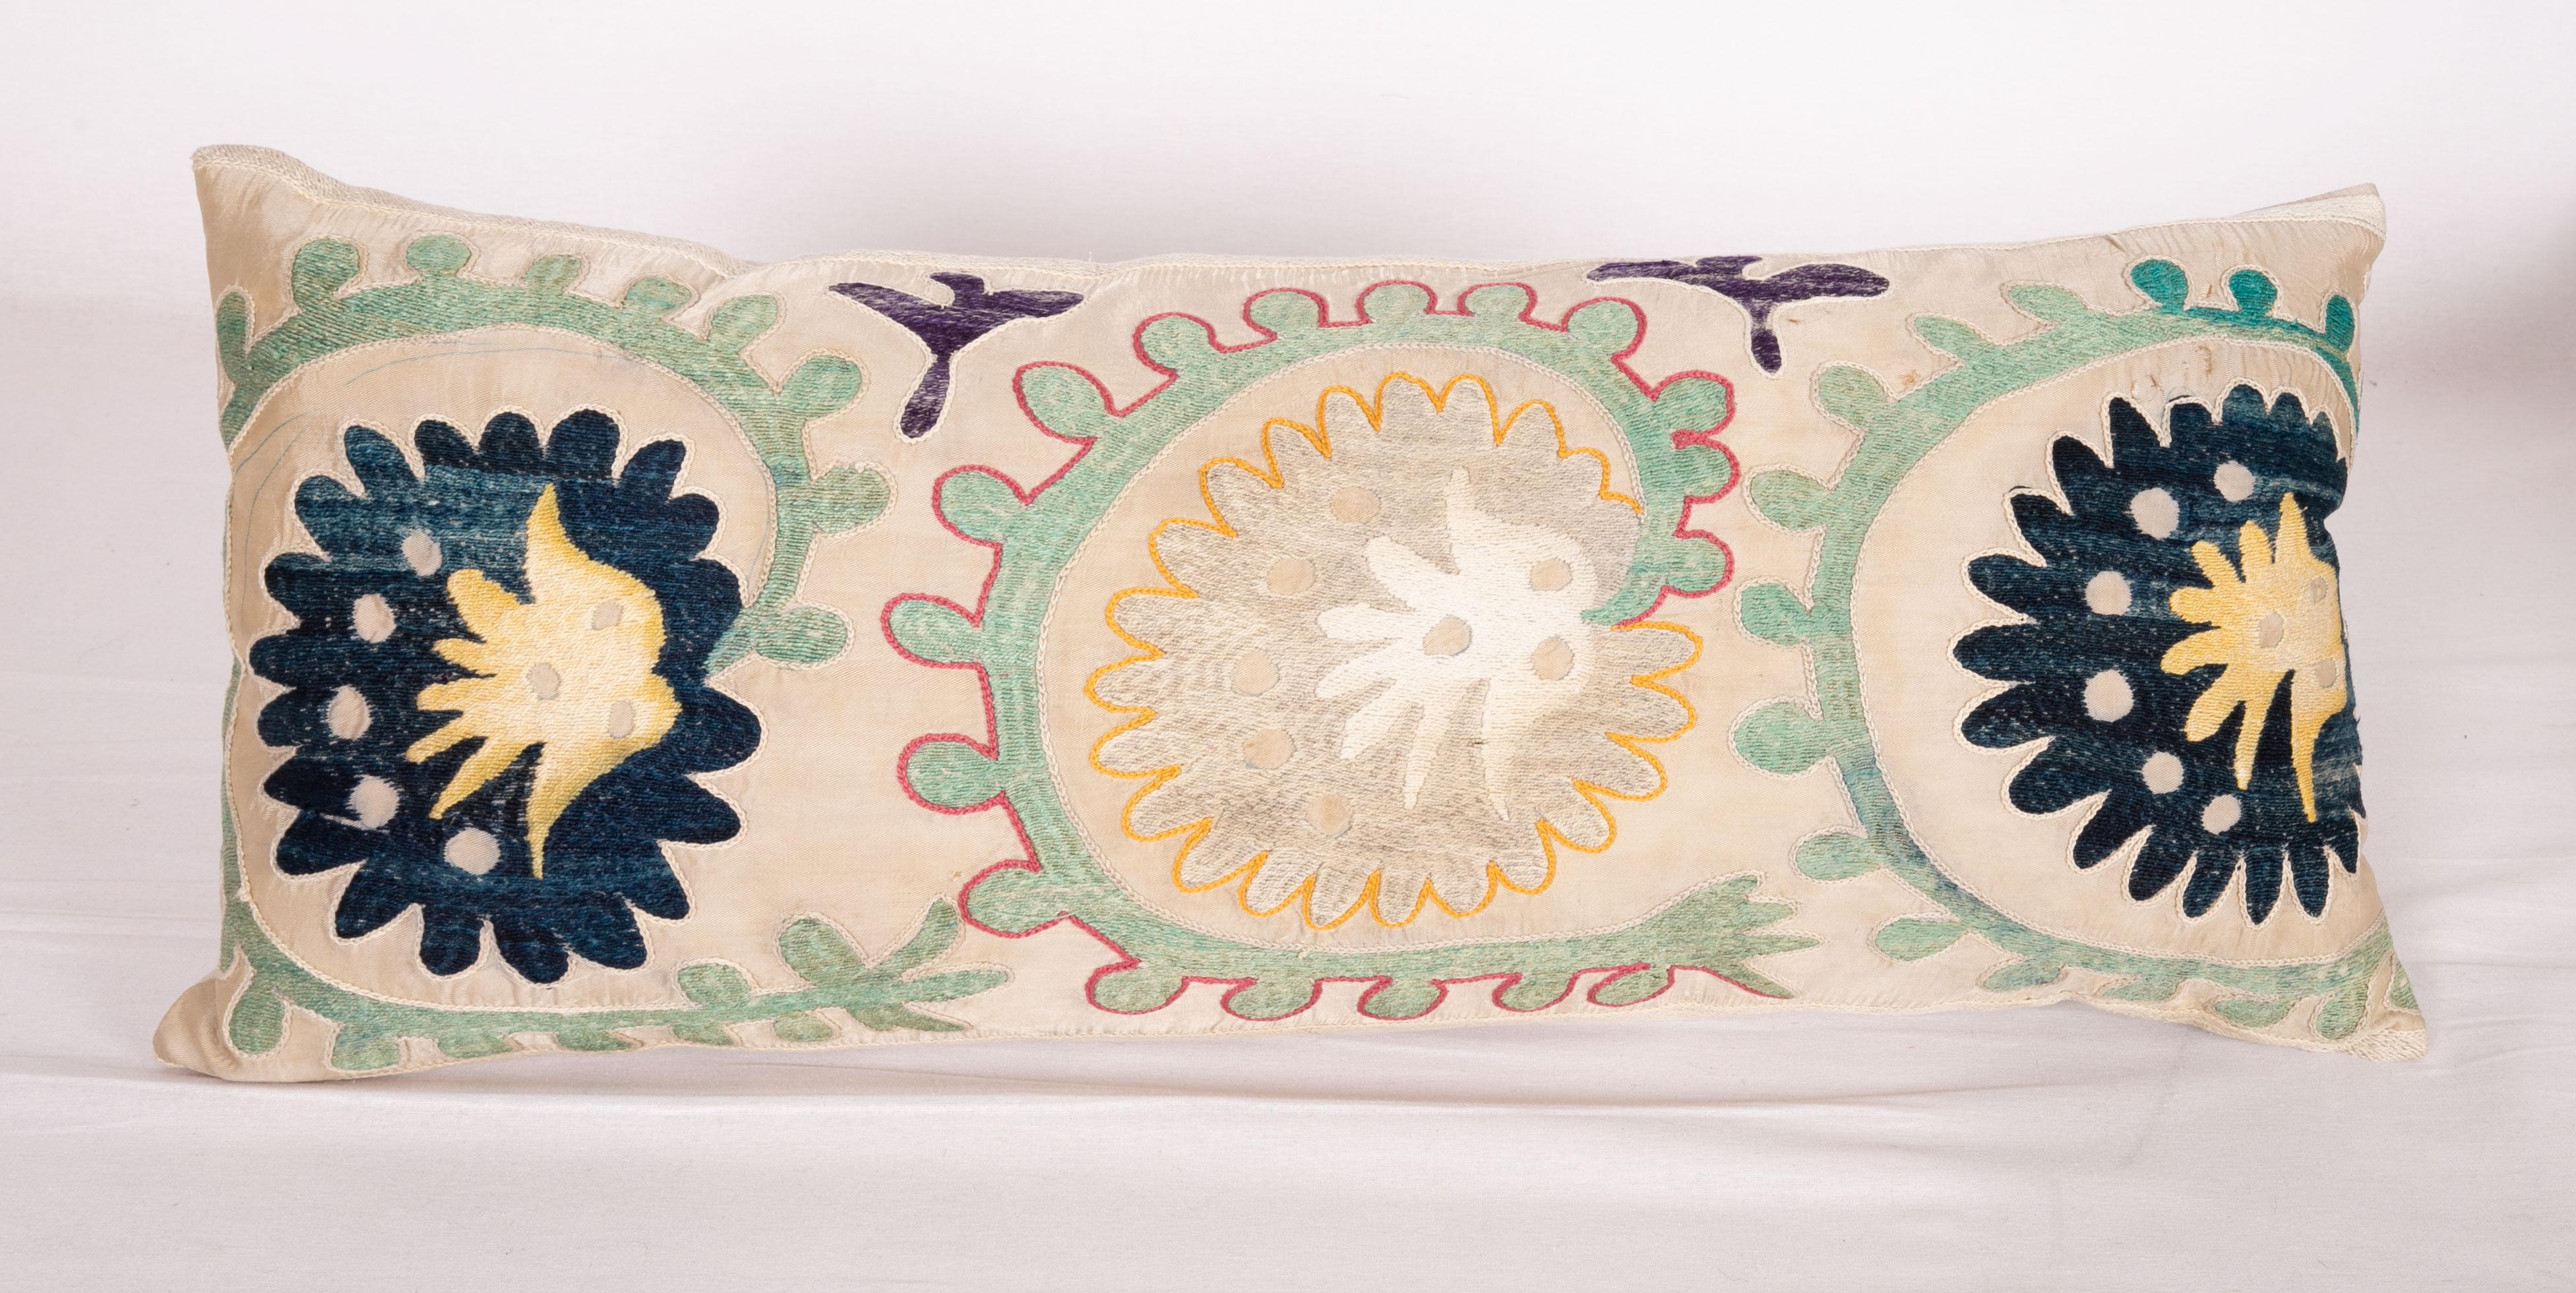 Embroidered Vintage Suzani Pillow Cases from Uzbekistan, Mid-20th Century